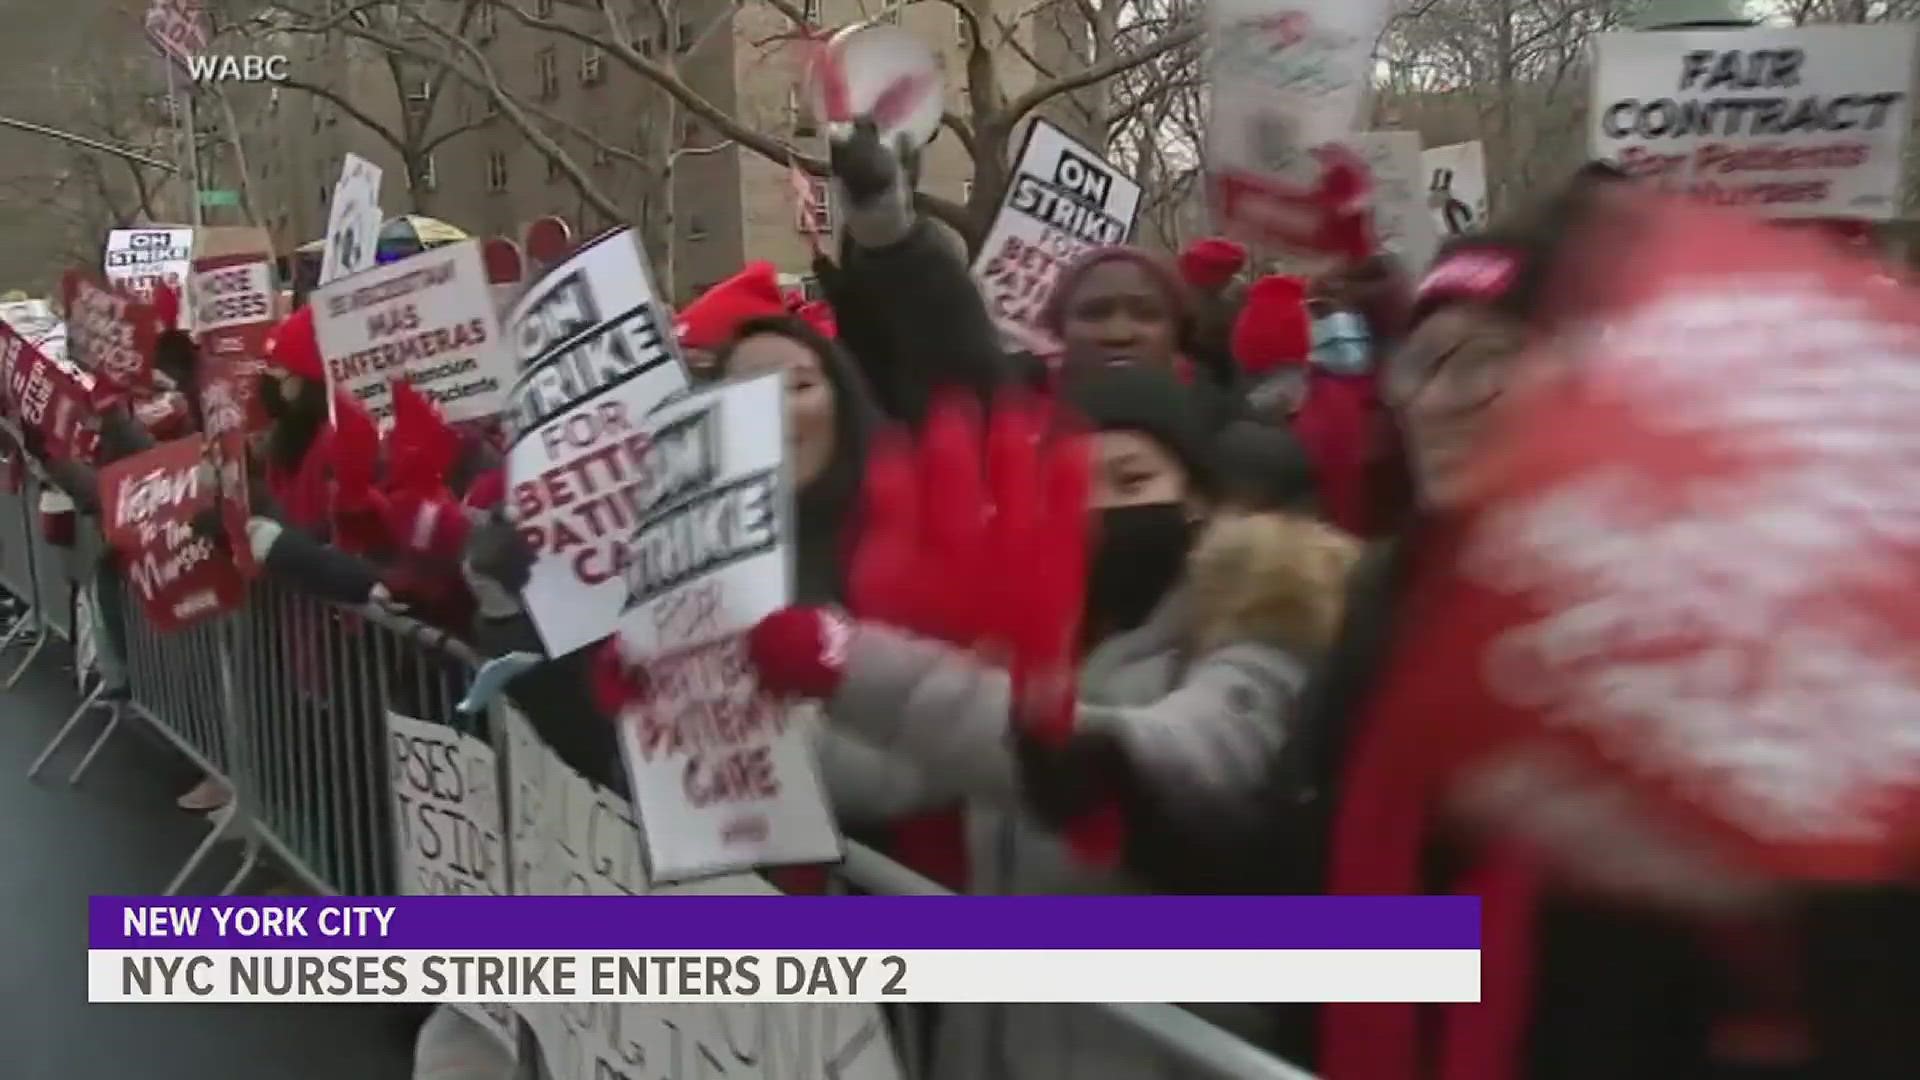 The nurses union said members had to strike because chronic understaffing leaves them caring for too many patients.